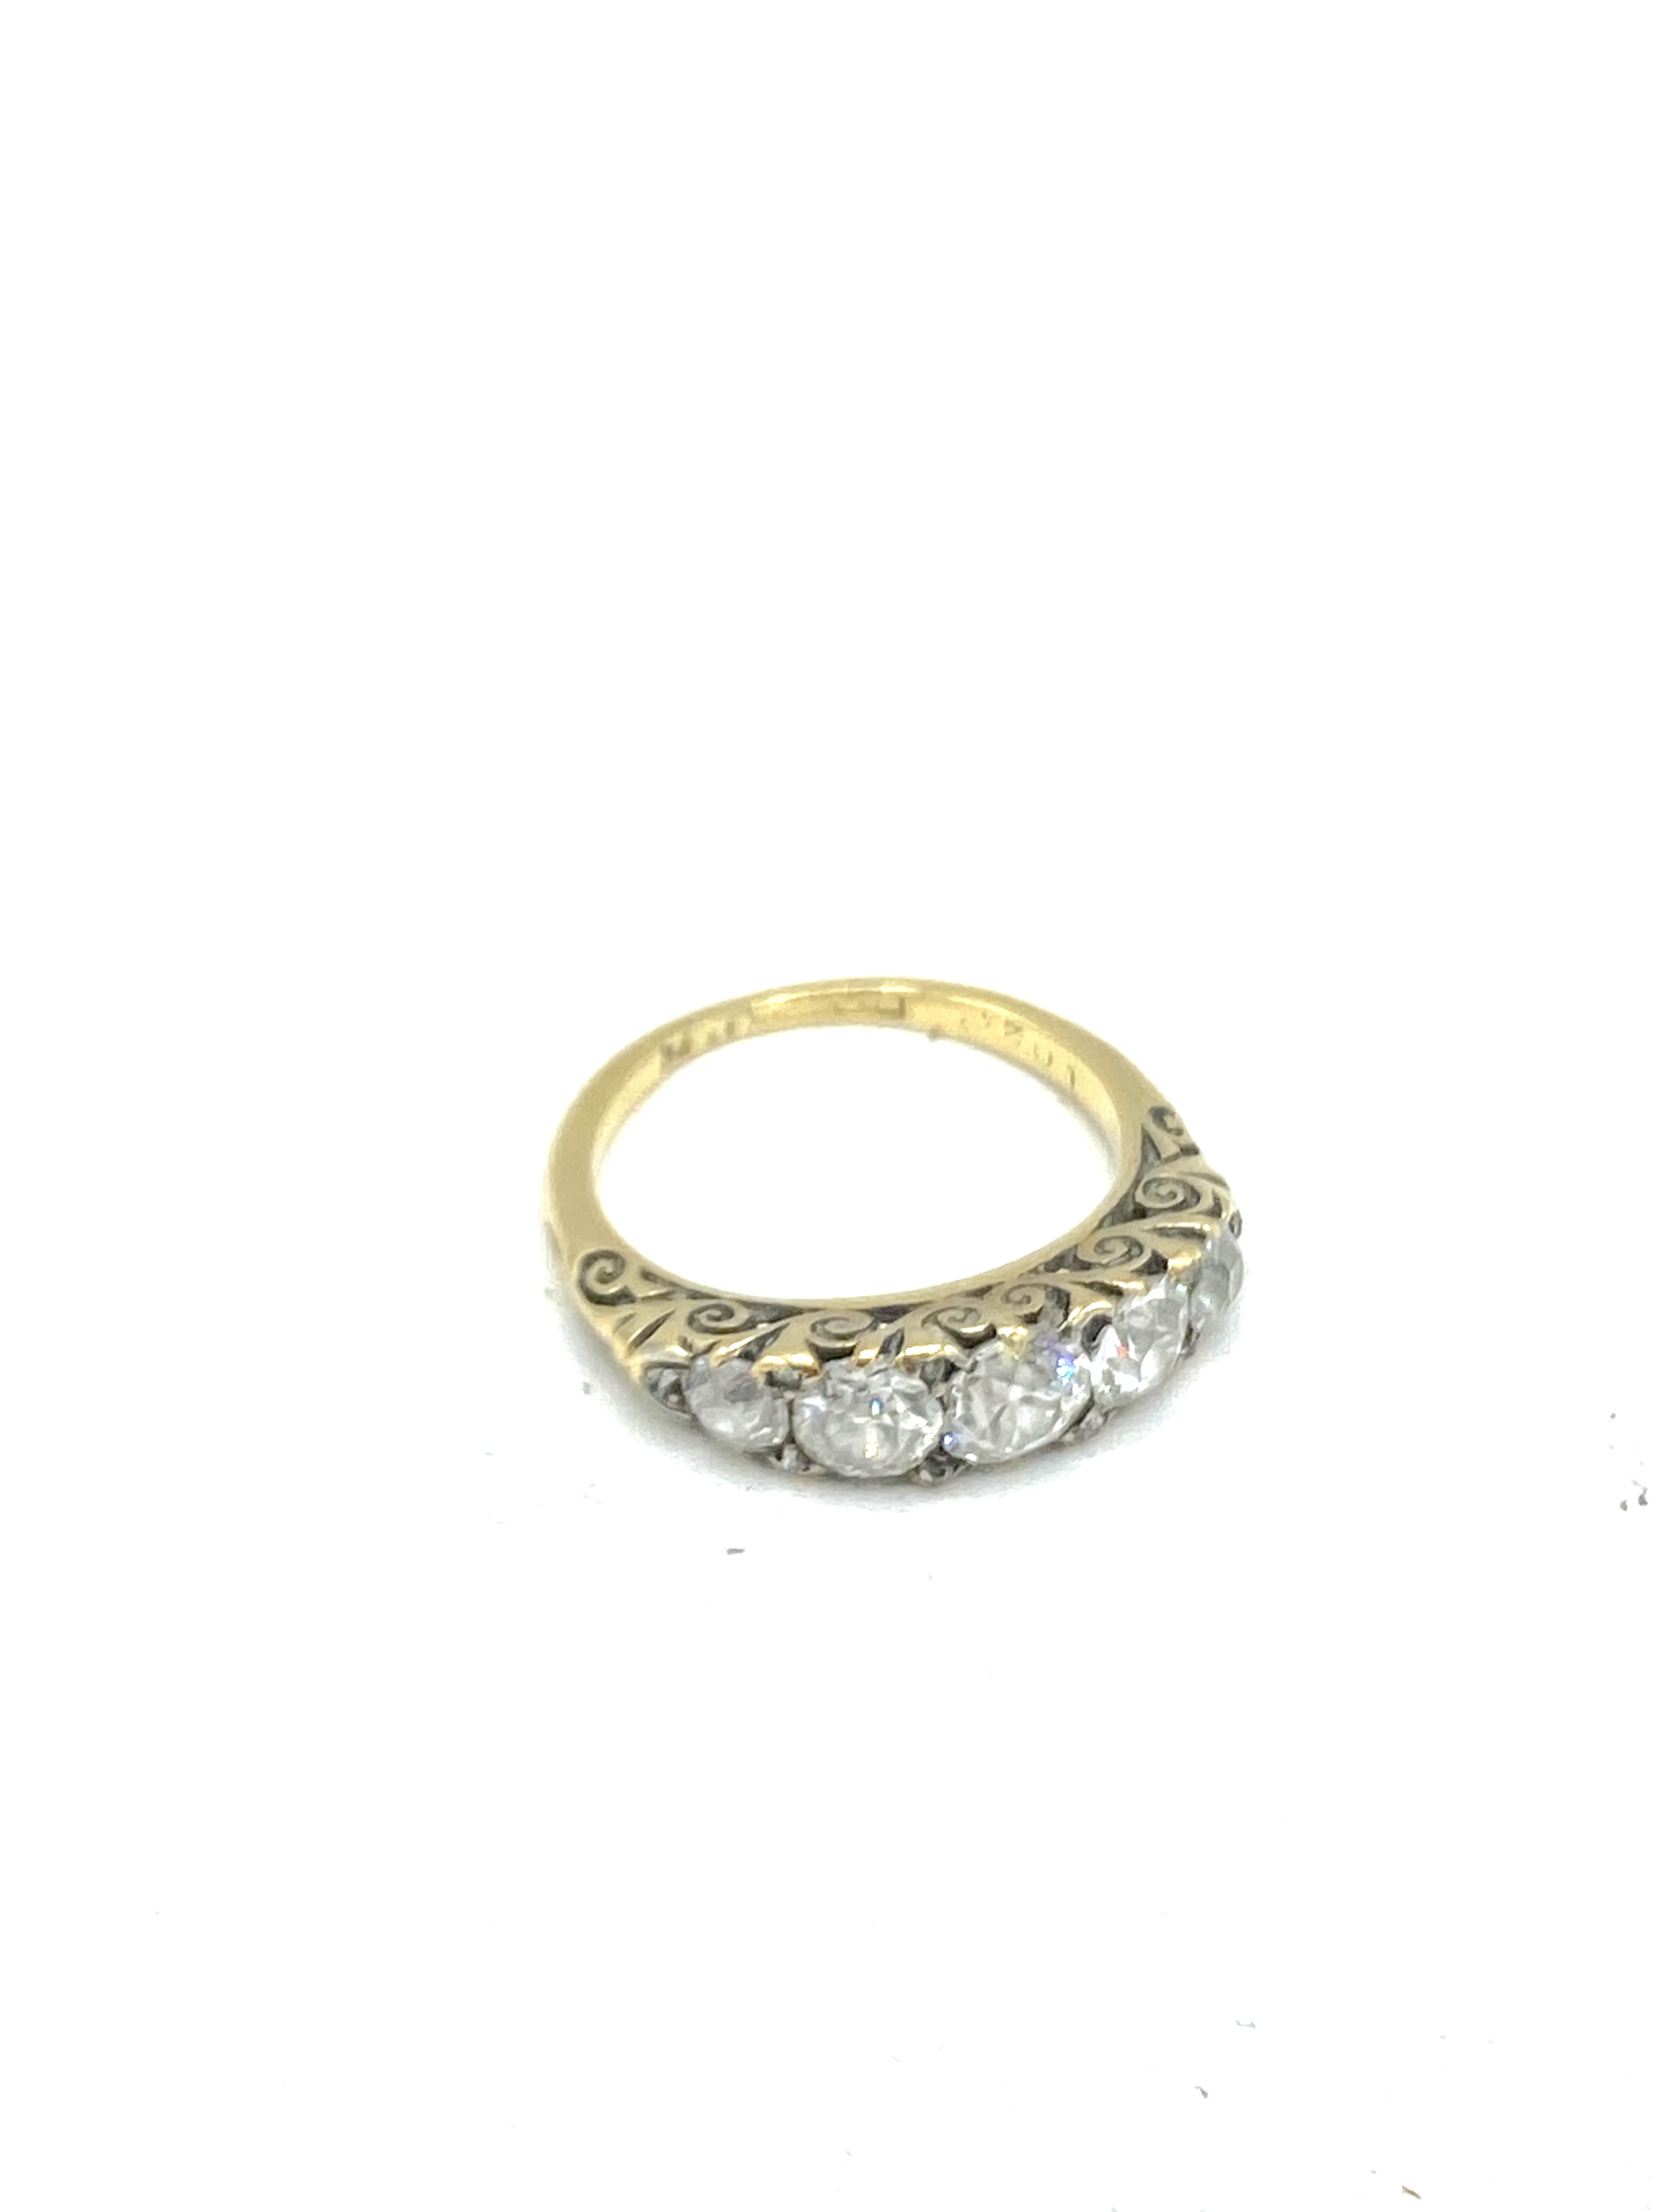 Five stone diamond ring set on an 18ct gold band